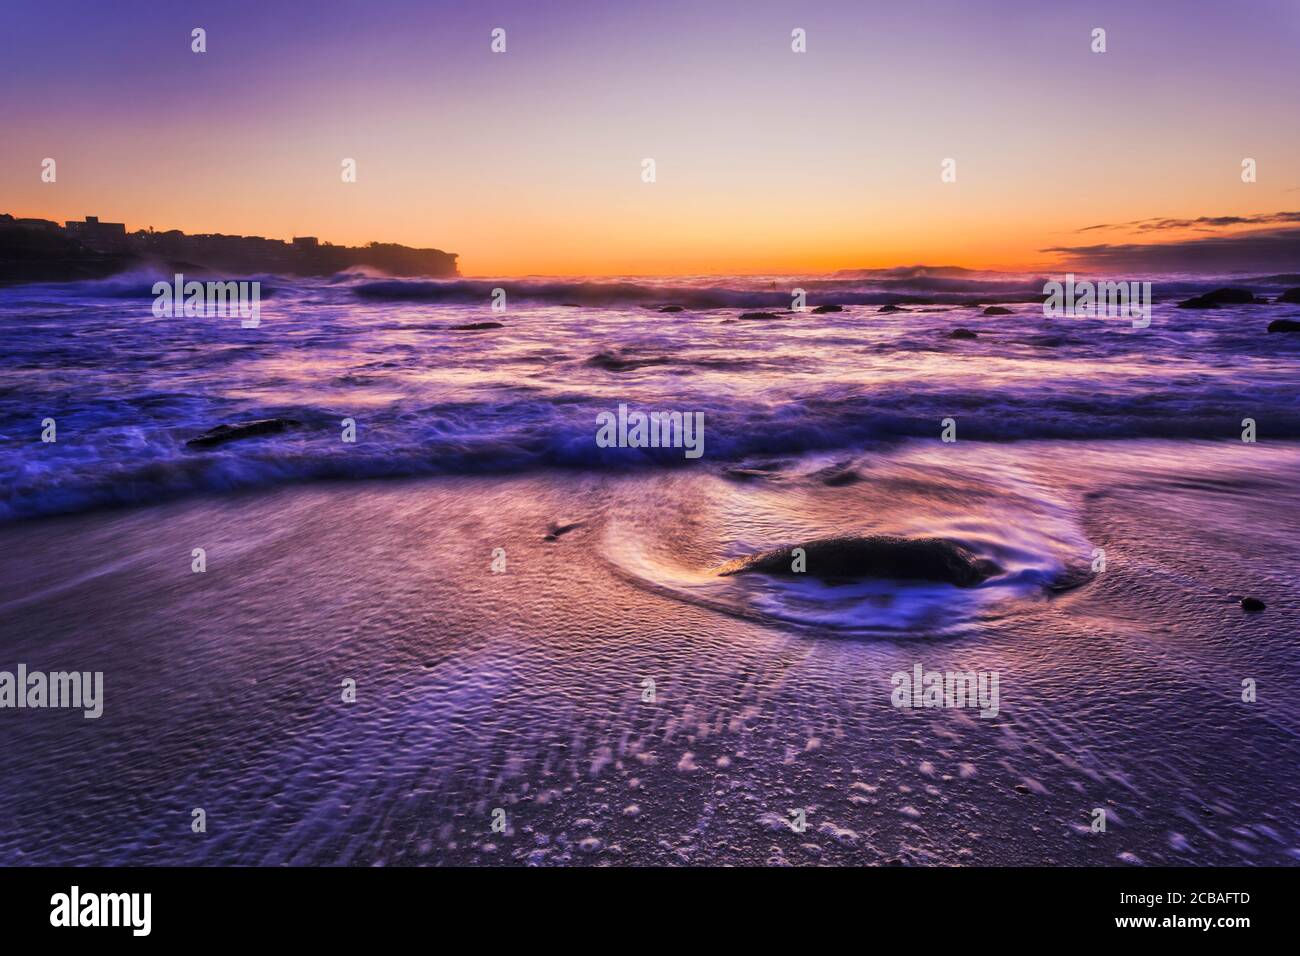 Sandy Bronte beach on Sydney Eastern suburbs coast of Pacific ocean at sunrise pre dawn with blurred water waves around rocks. Stock Photo